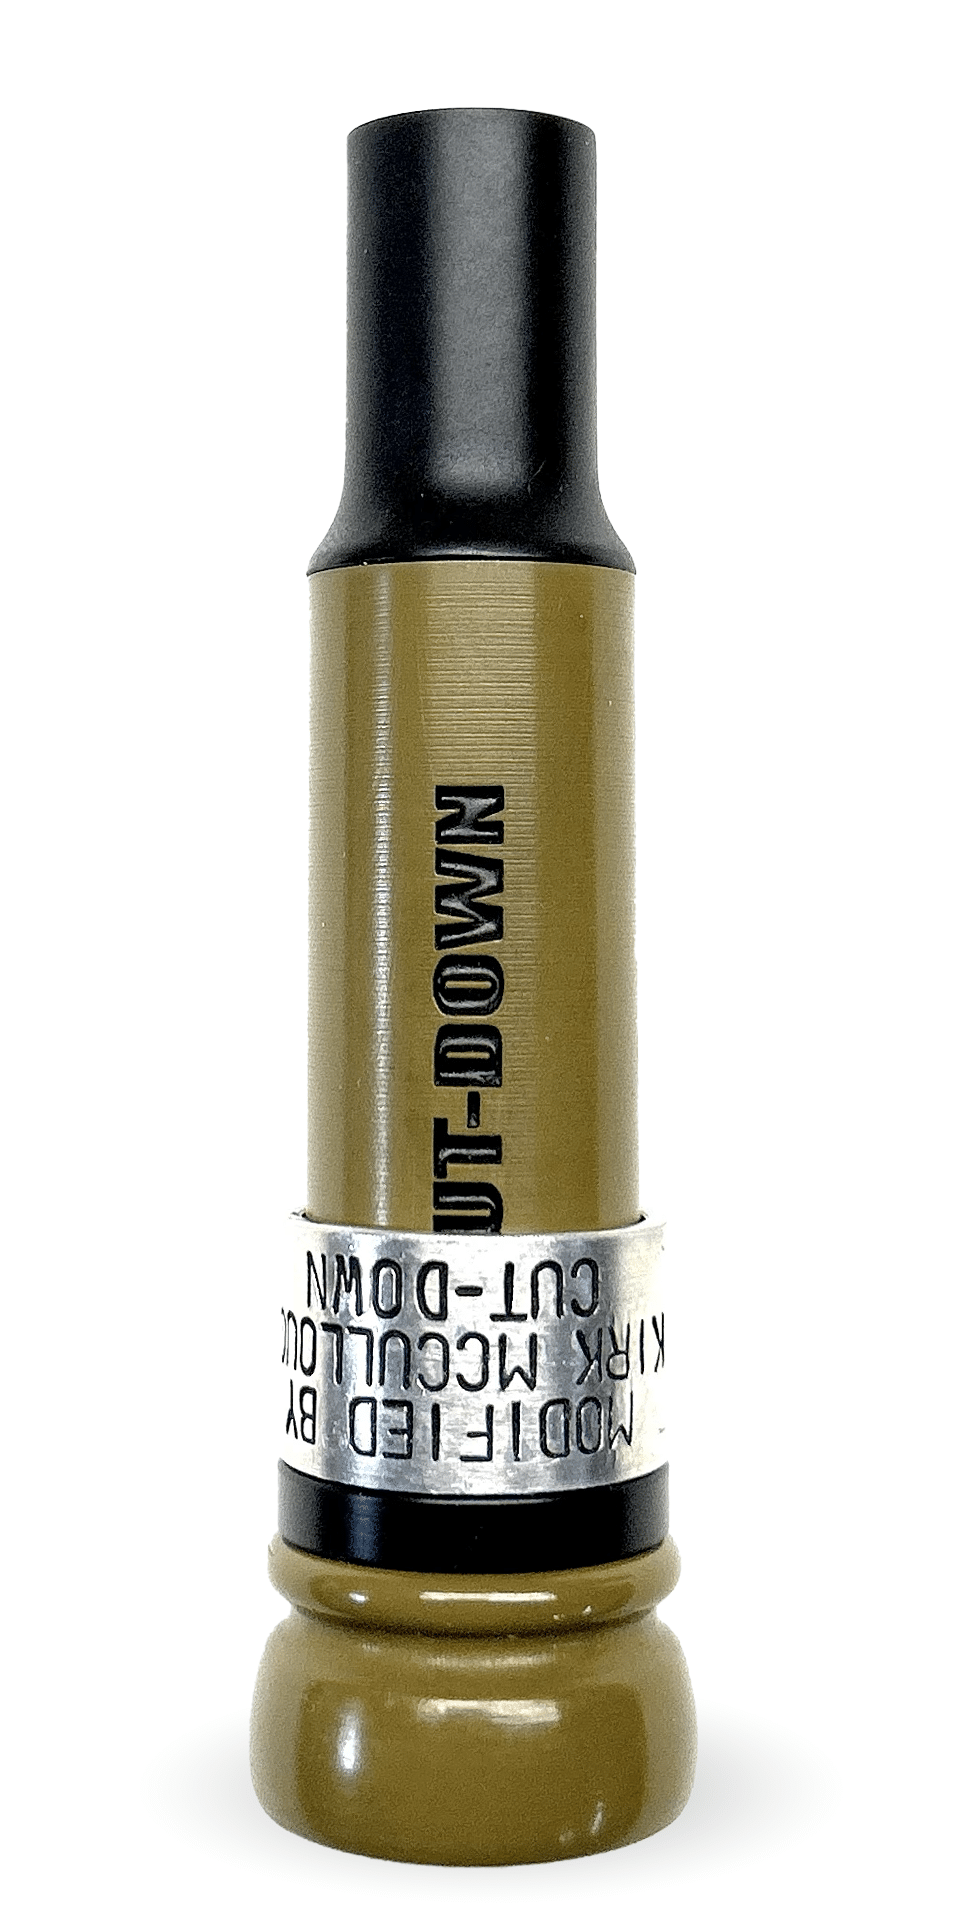 Introducing the Black Label Cut-Down Duck Call — Olive Drab Keyhole Superior Craftsmanship and Performance Elevate your waterfowl hunting with the Black Label Cut-Down Duck Call, meticulously designed and hand-crafted by the renowned Kirk McCullough. This premium duck call is built for optimal performance and reliability in the field, ensuring every call counts. Key Features: Threaded Keyhole Insert: Ensures consistent and reliable performance, enhancing your success rate in the field. Medium Cut for Deep Mallard Tone: Produces authentic, deep mallard sounds that resonate effectively through marshes and wetlands, attracting ducks from afar. RIM-CUT Design: Enhances sound quality, delivering smooth and crisp tones that excel in both high and low ranges with a flat quack. Built to Hunt: Loud and user-friendly, this call is perfect for hunters of all experience levels, providing ease of use and powerful sound projection. Crafted by Experts: Each call is meticulously designed, hand-cut, and tuned by Kirk McCullough, ensuring top-tier craftsmanship and attention to detail. Why Choose the Black Label Cut-Down Duck Call? High-Pressure Hunting Excellence: Ideal for hunting high-pressured, public ground ducks in Arkansas and Louisiana. Its piercing sound cuts through the noise of wetlands, attracting ducks from great distances. Made in the USA: Proudly crafted on the great Mississippi flyway in Arkansas, ensuring durability and superior quality. Comprehensive Accessories: Includes four 14-mil hand-punched Mylar reeds and one rubberized cork strip for additional insert wedges, ensuring you're always prepared in the field. Exceptional Sound Quality and User Friendliness Realistic Sound: Produces lifelike mallard hen sounds with minimal effort, ensuring effective communication with ducks. Loud, Piercing Sound: Designed to cut through the noise of the wetlands, attracting ducks from great distances. User Friendly: Built to hunt, this call offers an intuitive design that is easy to use, making it suitable for both novice and experienced hunters. Summary The Black Label Cut-Down Duck Call is the ultimate tool for dedicated waterfowl hunters. Combining precision craftsmanship, exceptional sound quality, and robust durability, this call ensures outstanding performance in any hunting scenario. Handcrafted by Kirk McCullough and made in the USA, it represents the pinnacle of duck call design. Whether you're tackling high-pressure environments or aiming for the perfect call in the wetlands, the Black Label Cut-Down Duck Call is your go-to choice for a successful hunt.